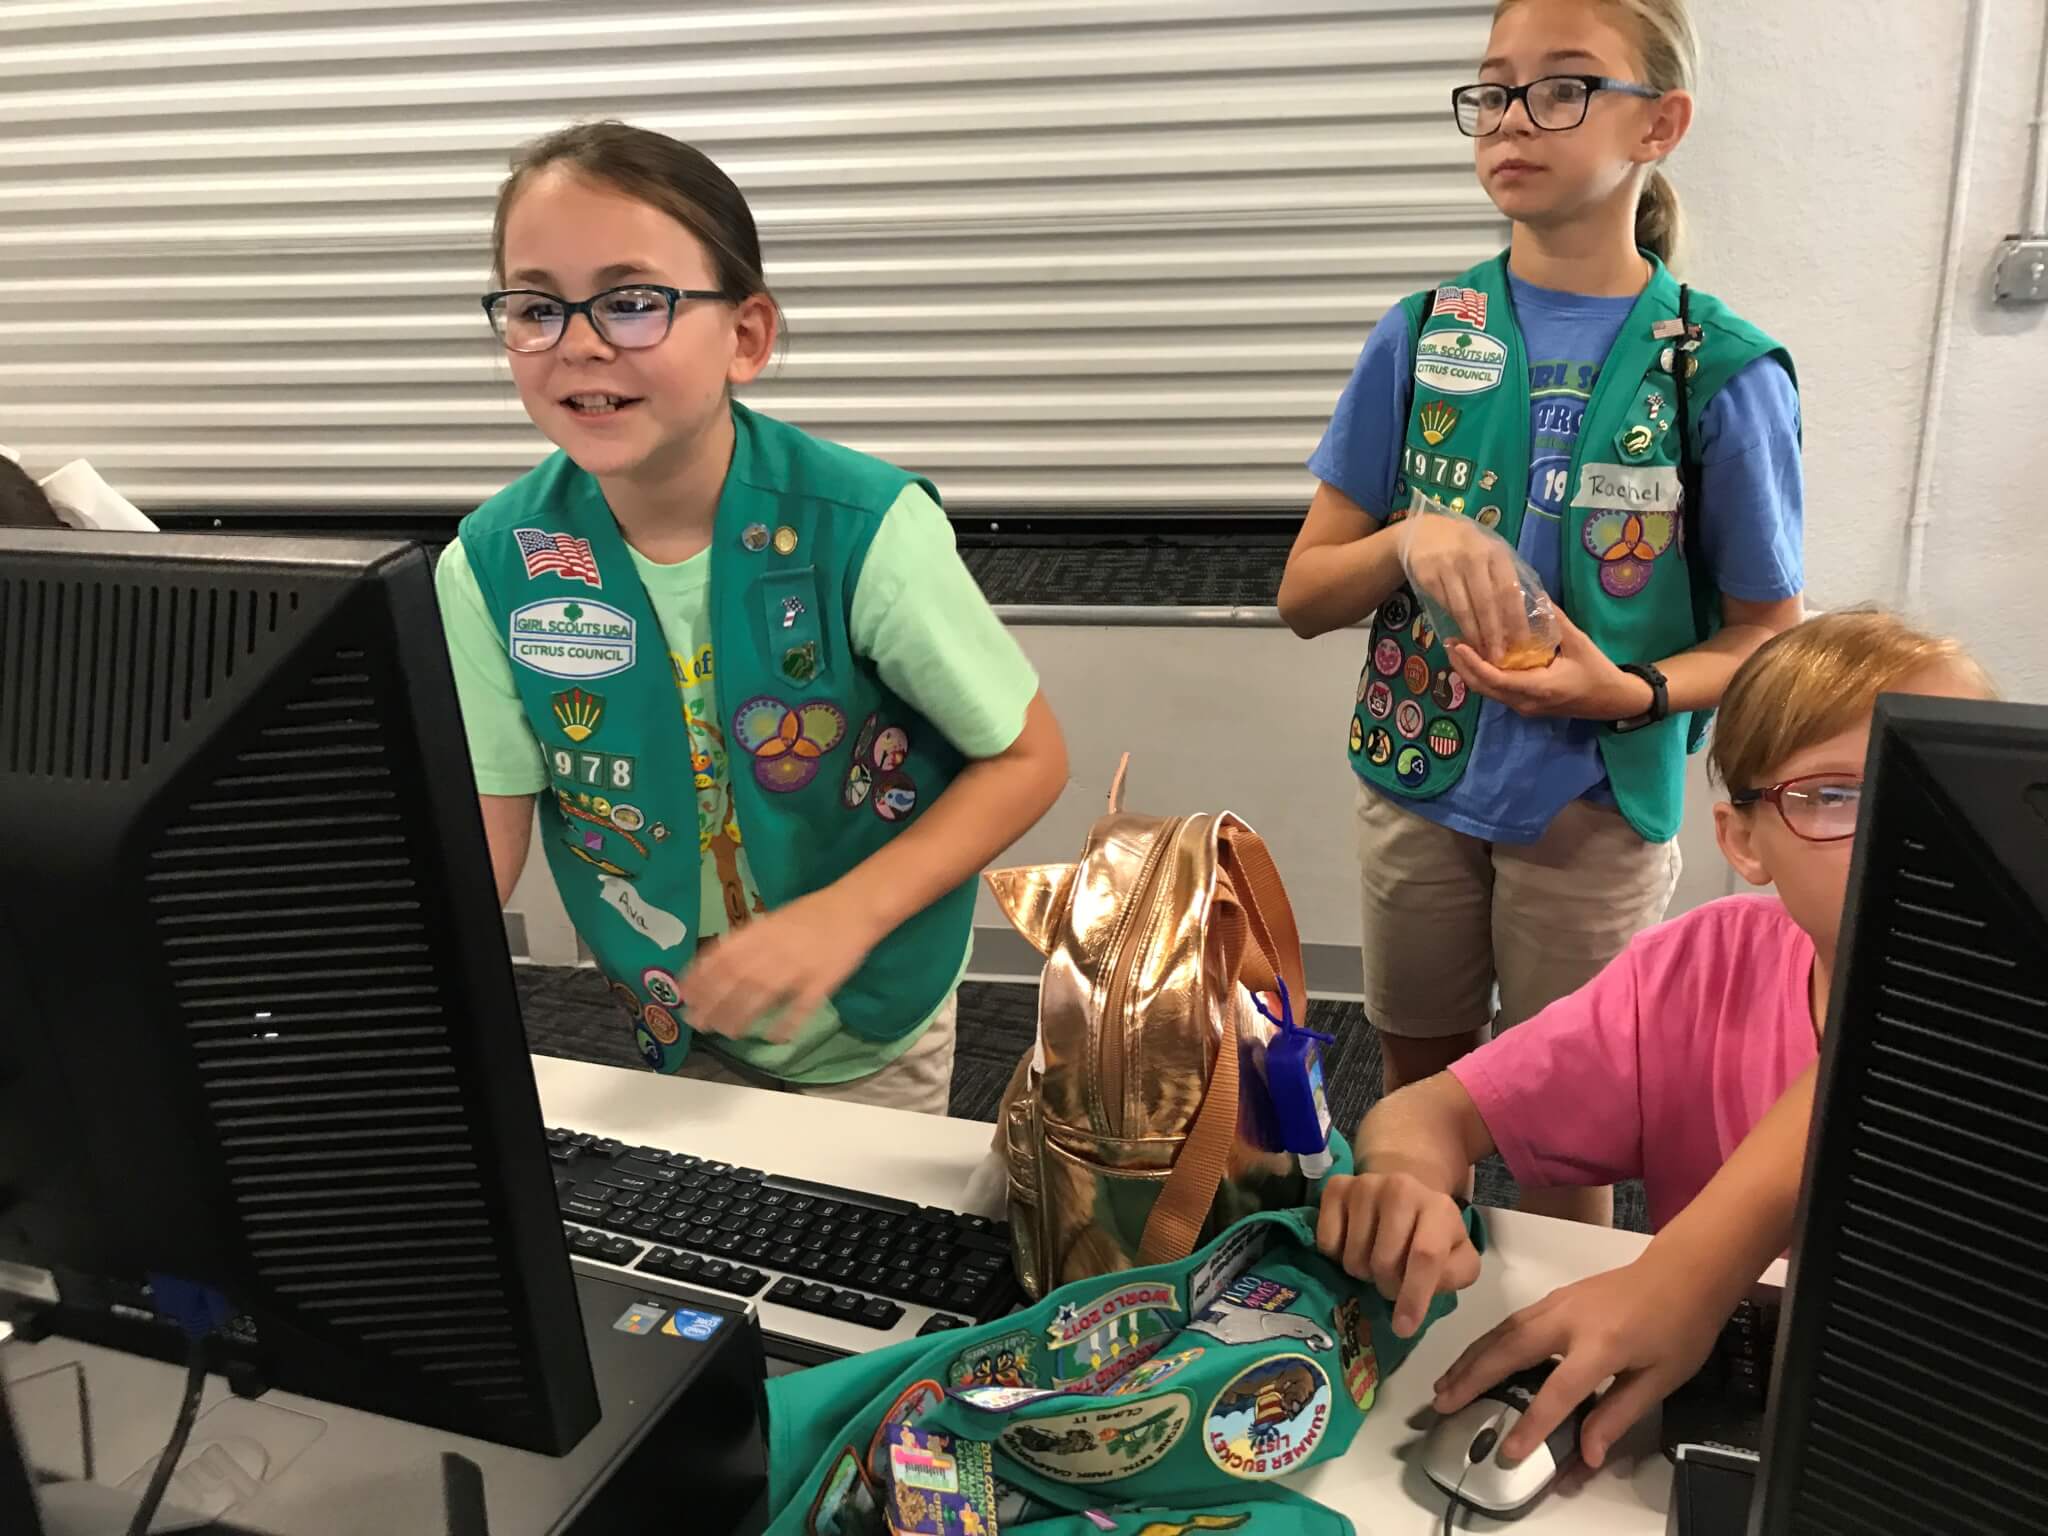 Girl Scouts visit Codecraft Works